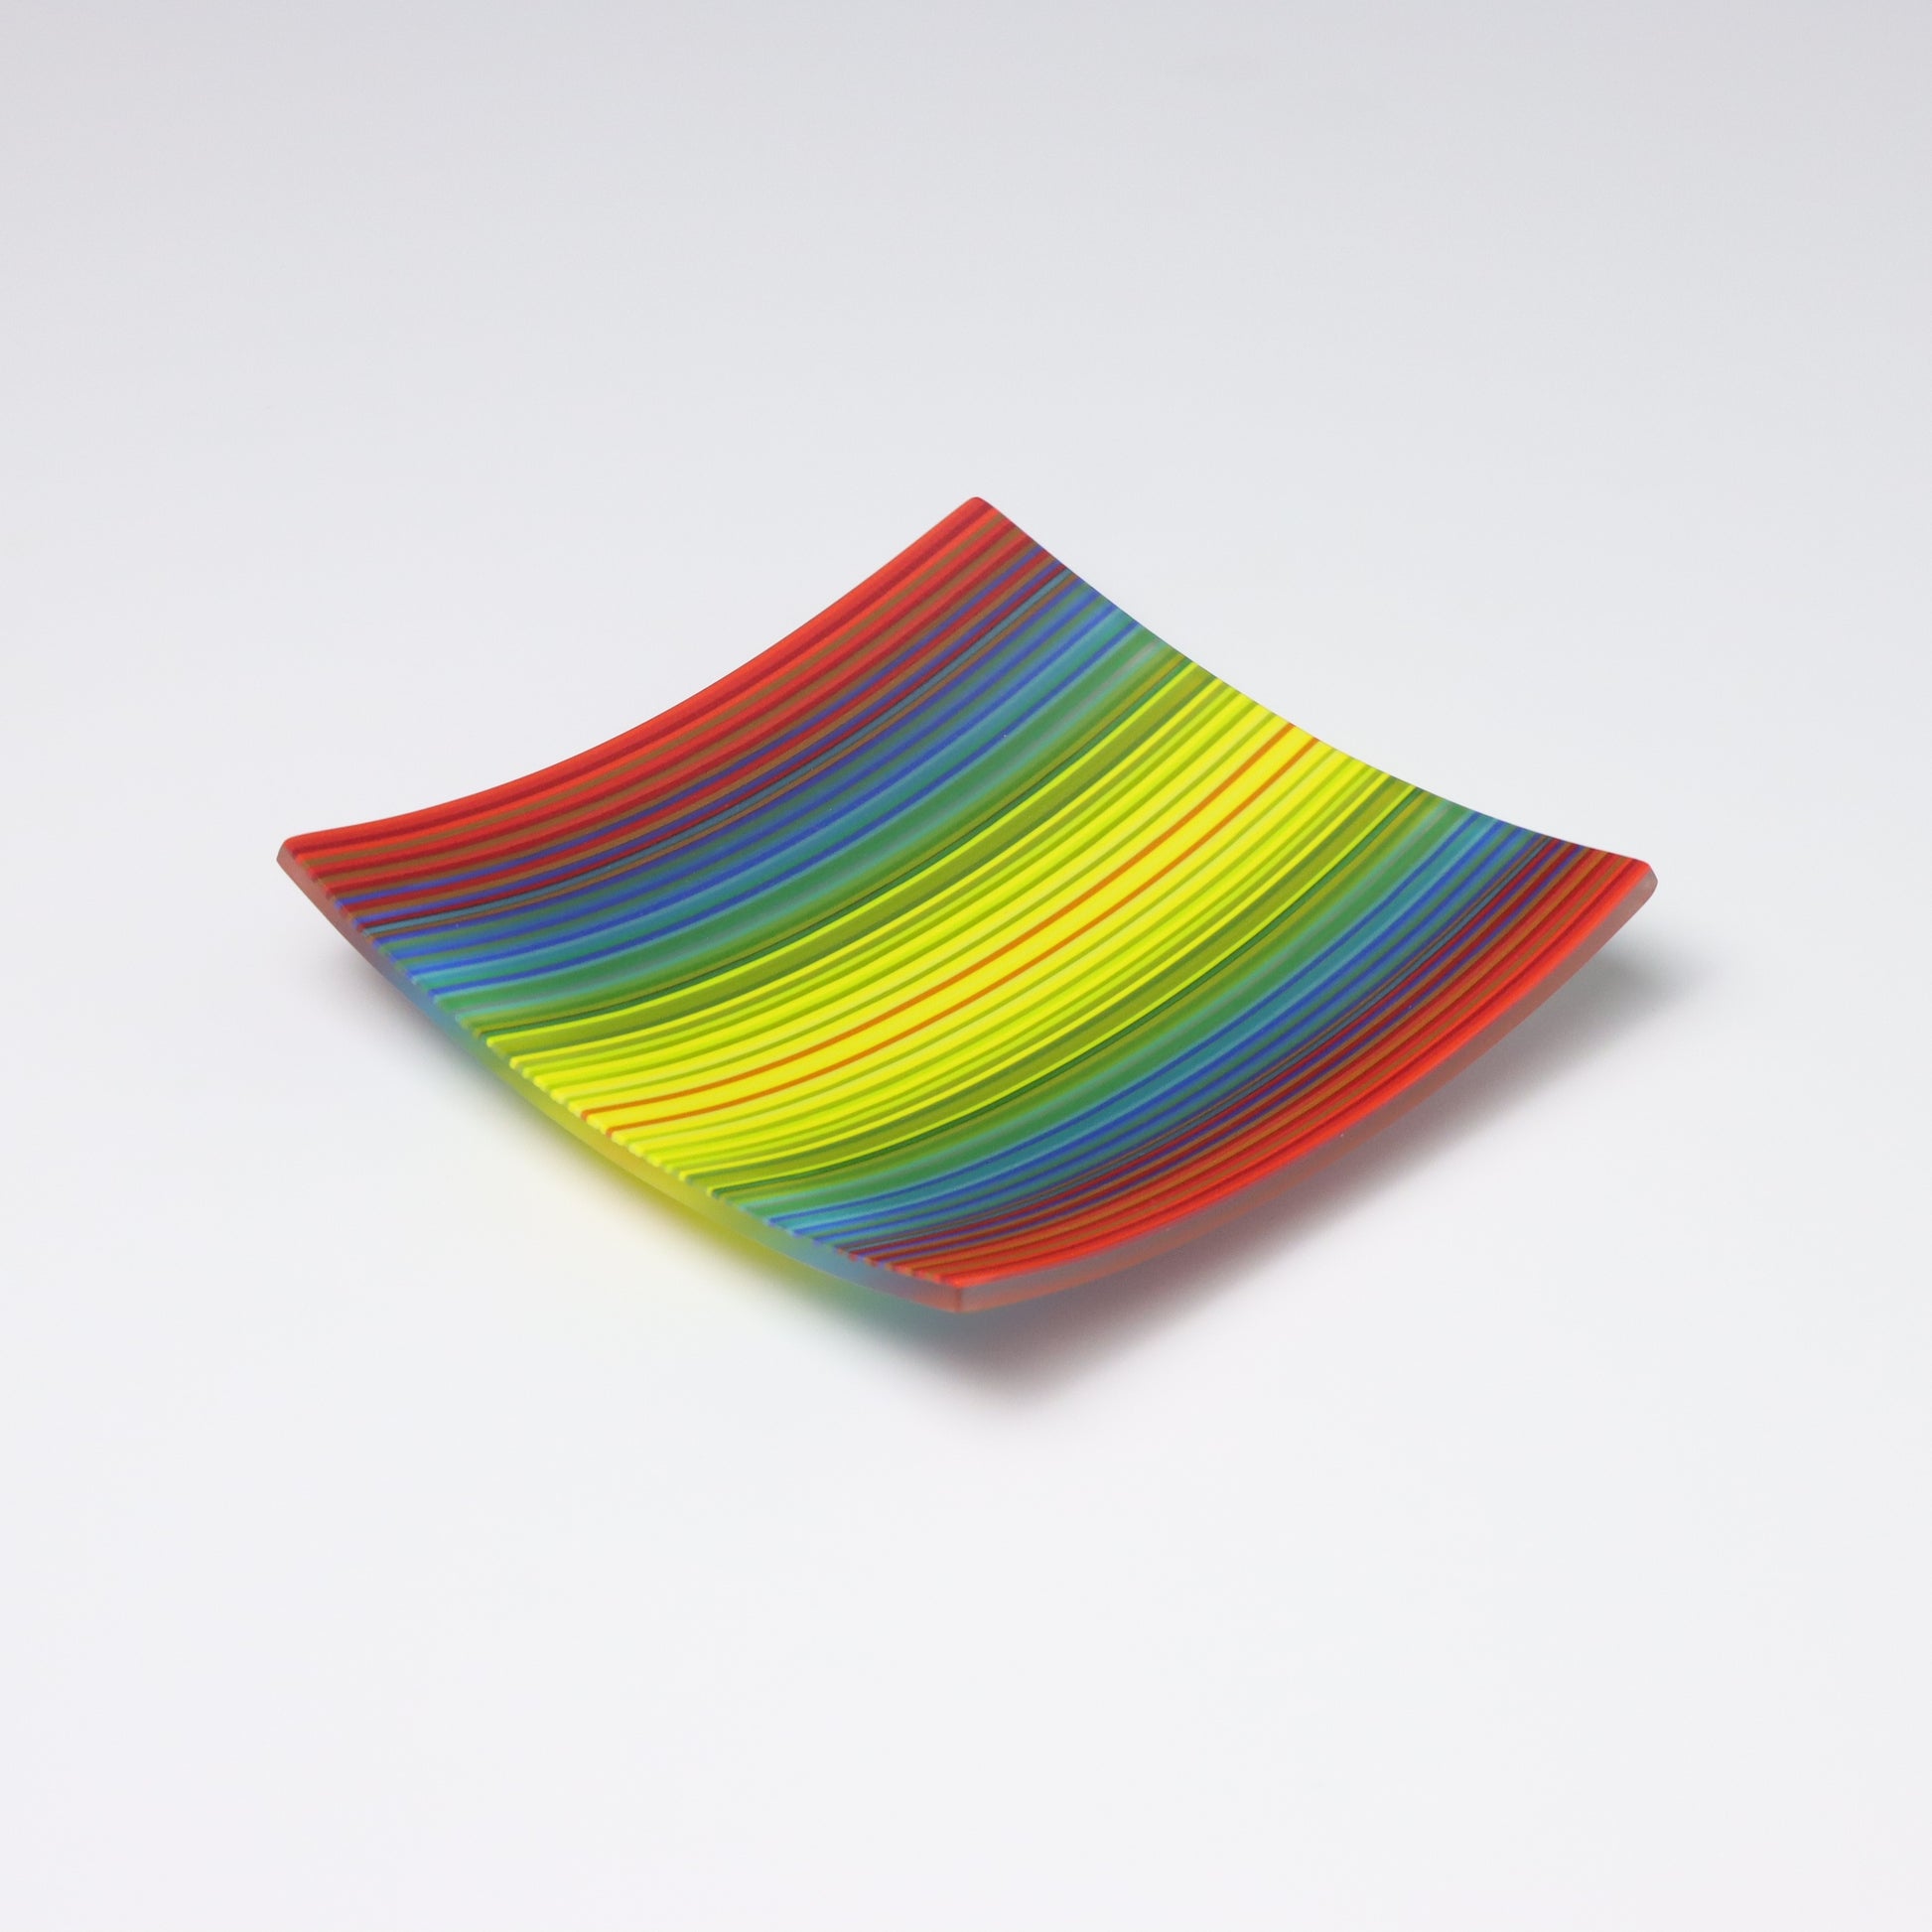 A decorative square shallow glass plate with raised corners and a  colourful ColourWave stripe patterns showing key colours of red, blue, green and yellow